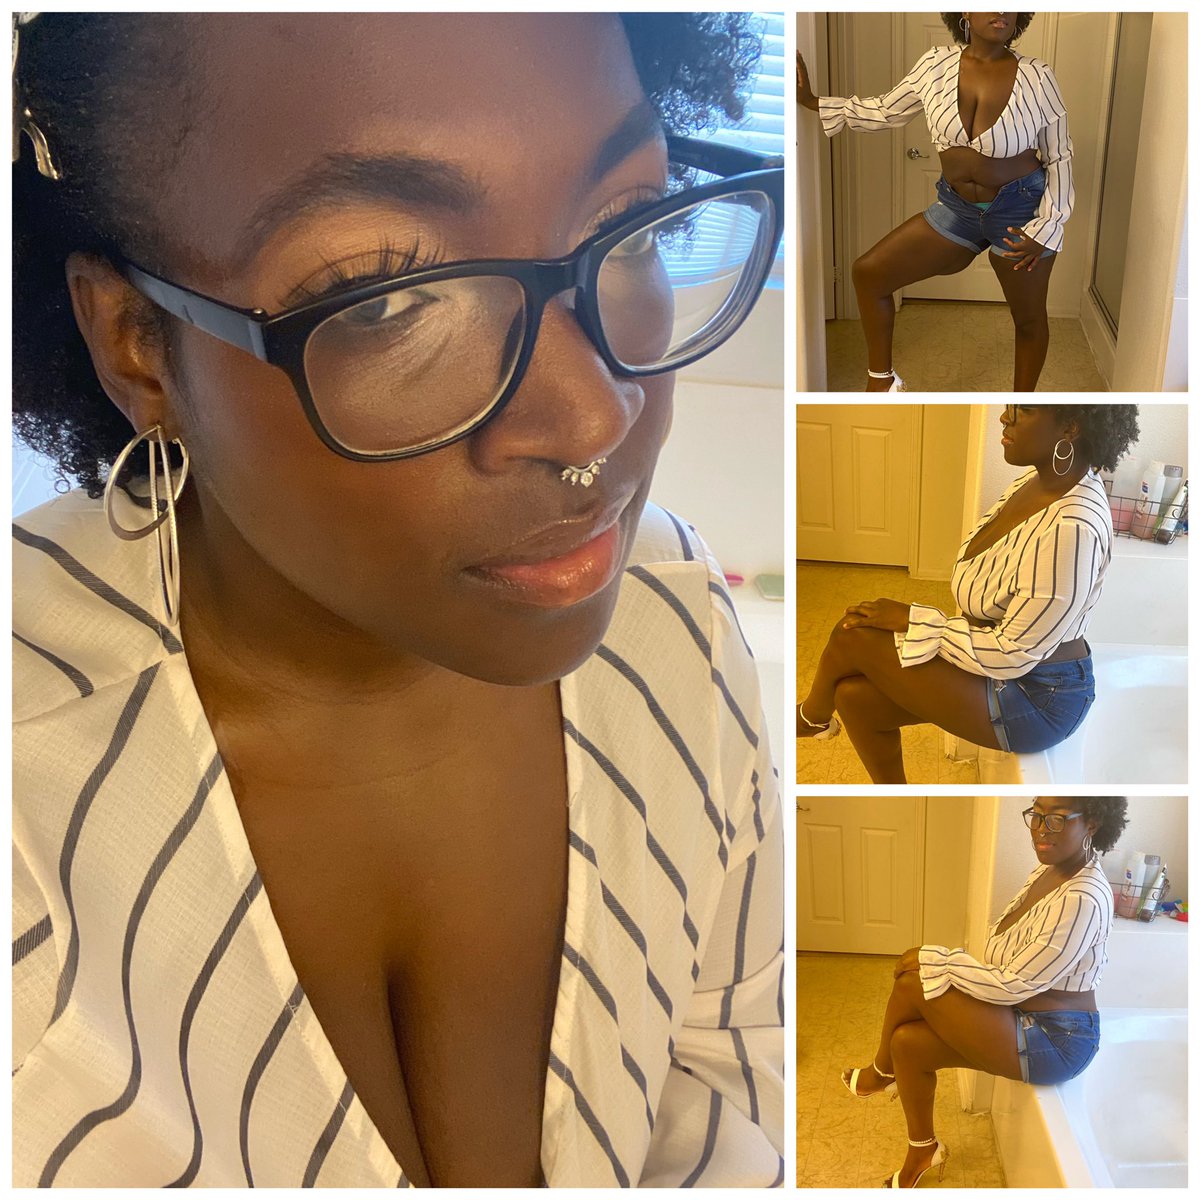 My stomach is full of wrinkles and stretch marks from all my babies...oh well #motherofseven #80lbsdown #melanin #melaninmagic #blkgirls #blackmothers